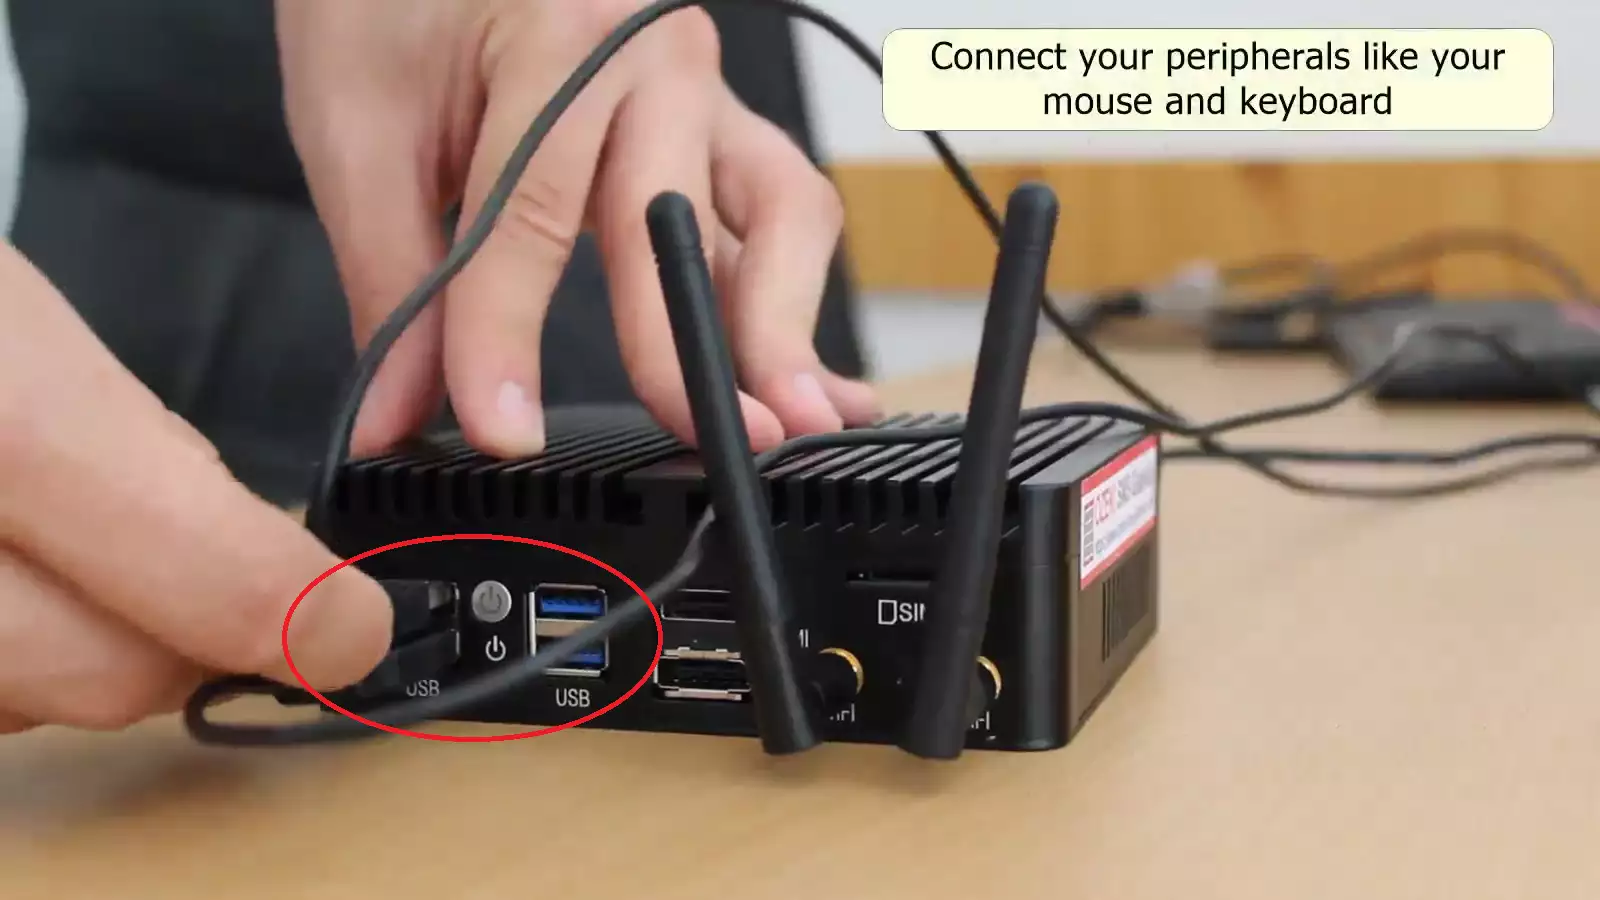 connect your peripherals via the usb ports